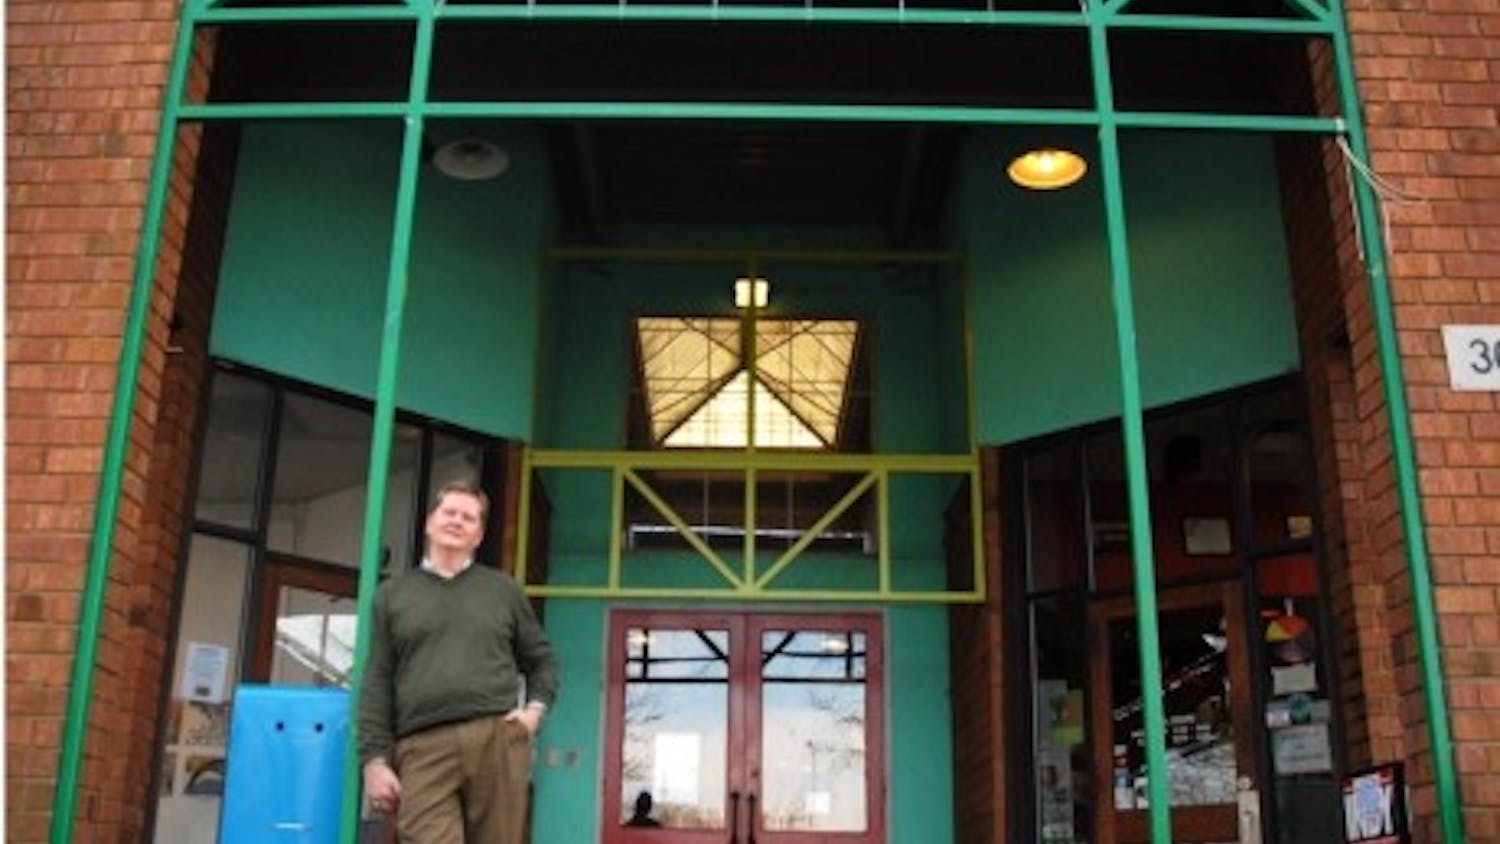 Ed Camp, former executive director of the ArtsCenter in Carrboro, stands outside&nbsp;the ArtsCenter in December 2010.